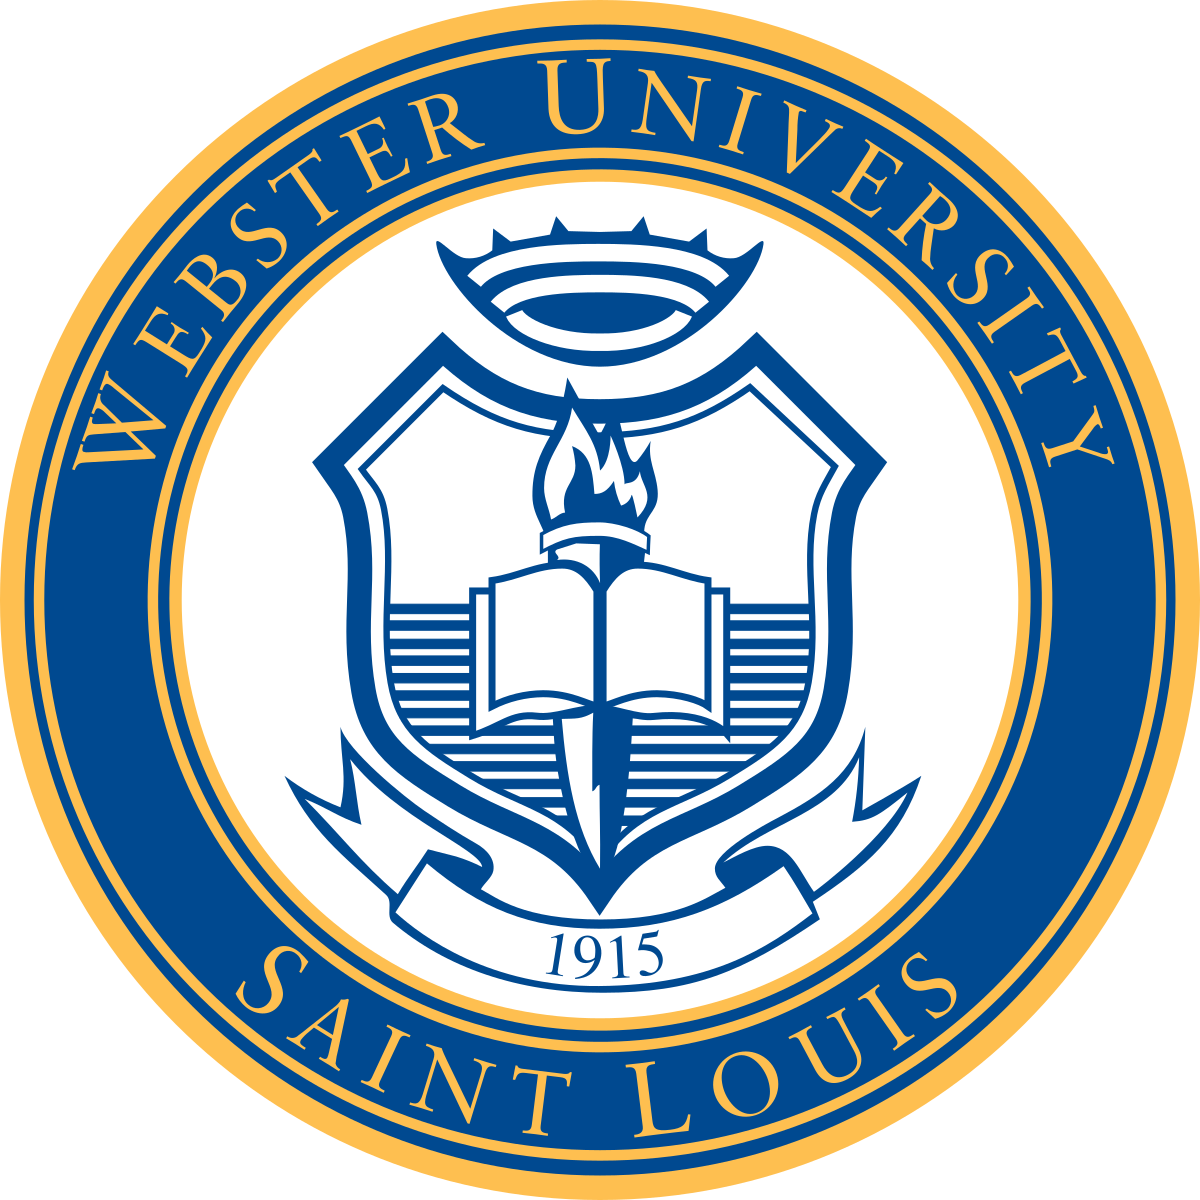 Webster University Admission Requirements 2022/2023